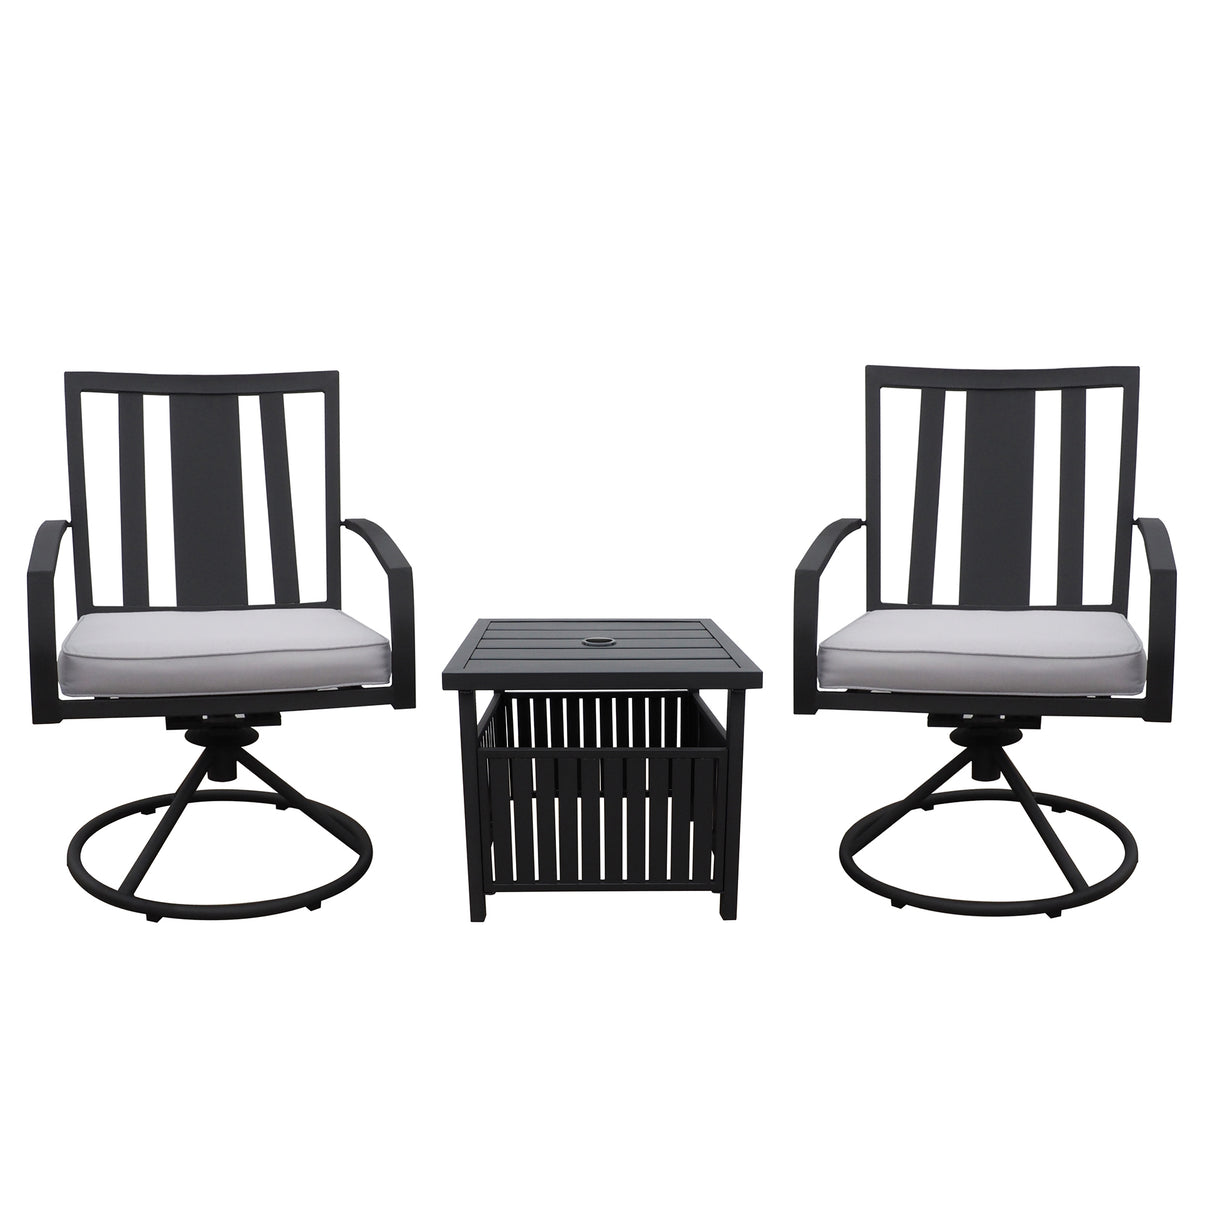 3 Piece Outdoor Patio Bistro Set, Swivel Chairs Set of 2 with Side Table and Cushions, Front Porch Furniture Set, Strong & Durable